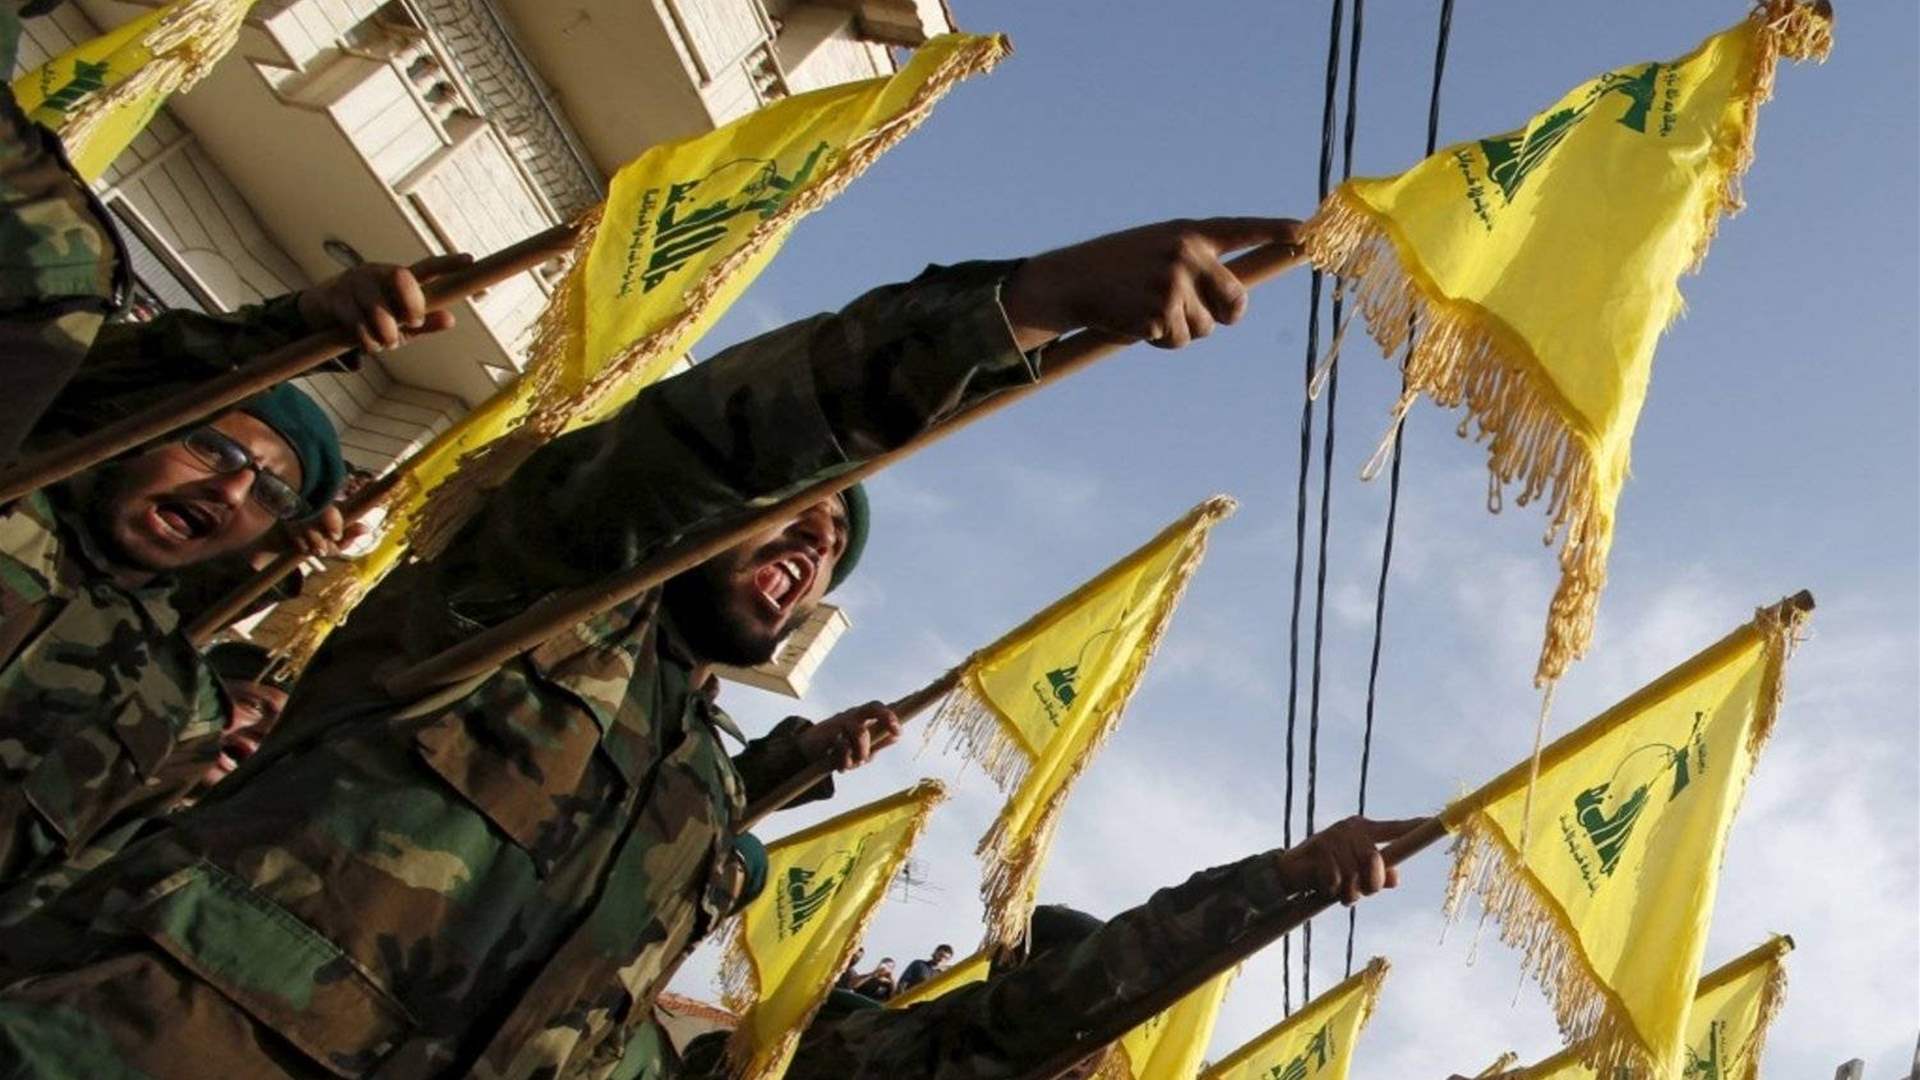 Five killed, including Hezbollah fighters, in an Israeli strike in southern Lebanon: Reuters sources